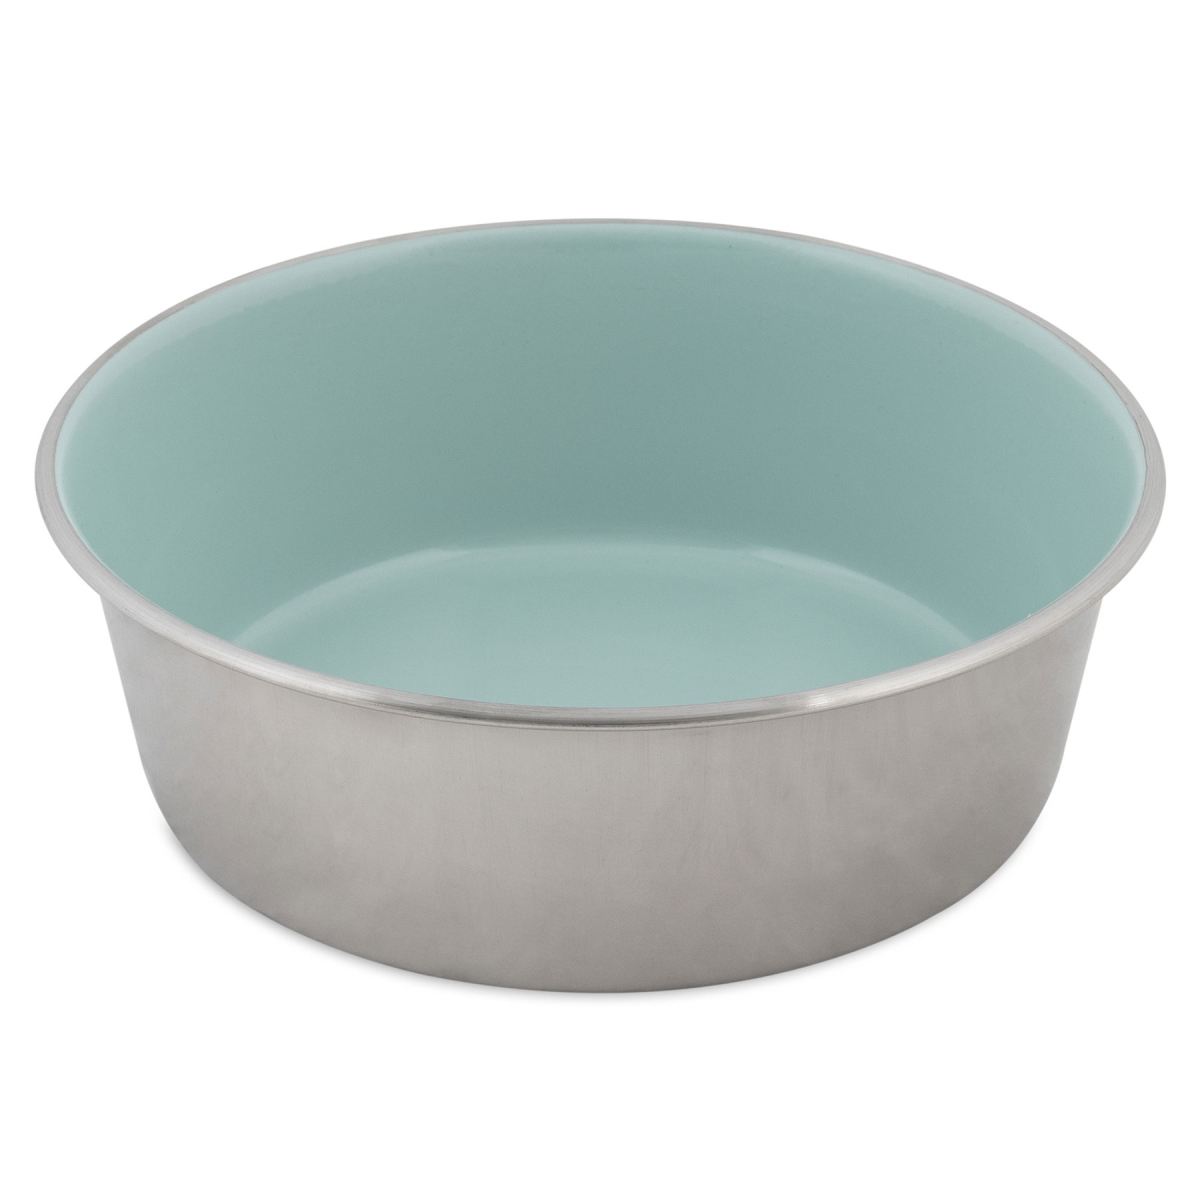 Picture of Petmate 029695341526 Painted Stainless Steel Pet Bowls - Eggshell Blue - 8 Piece